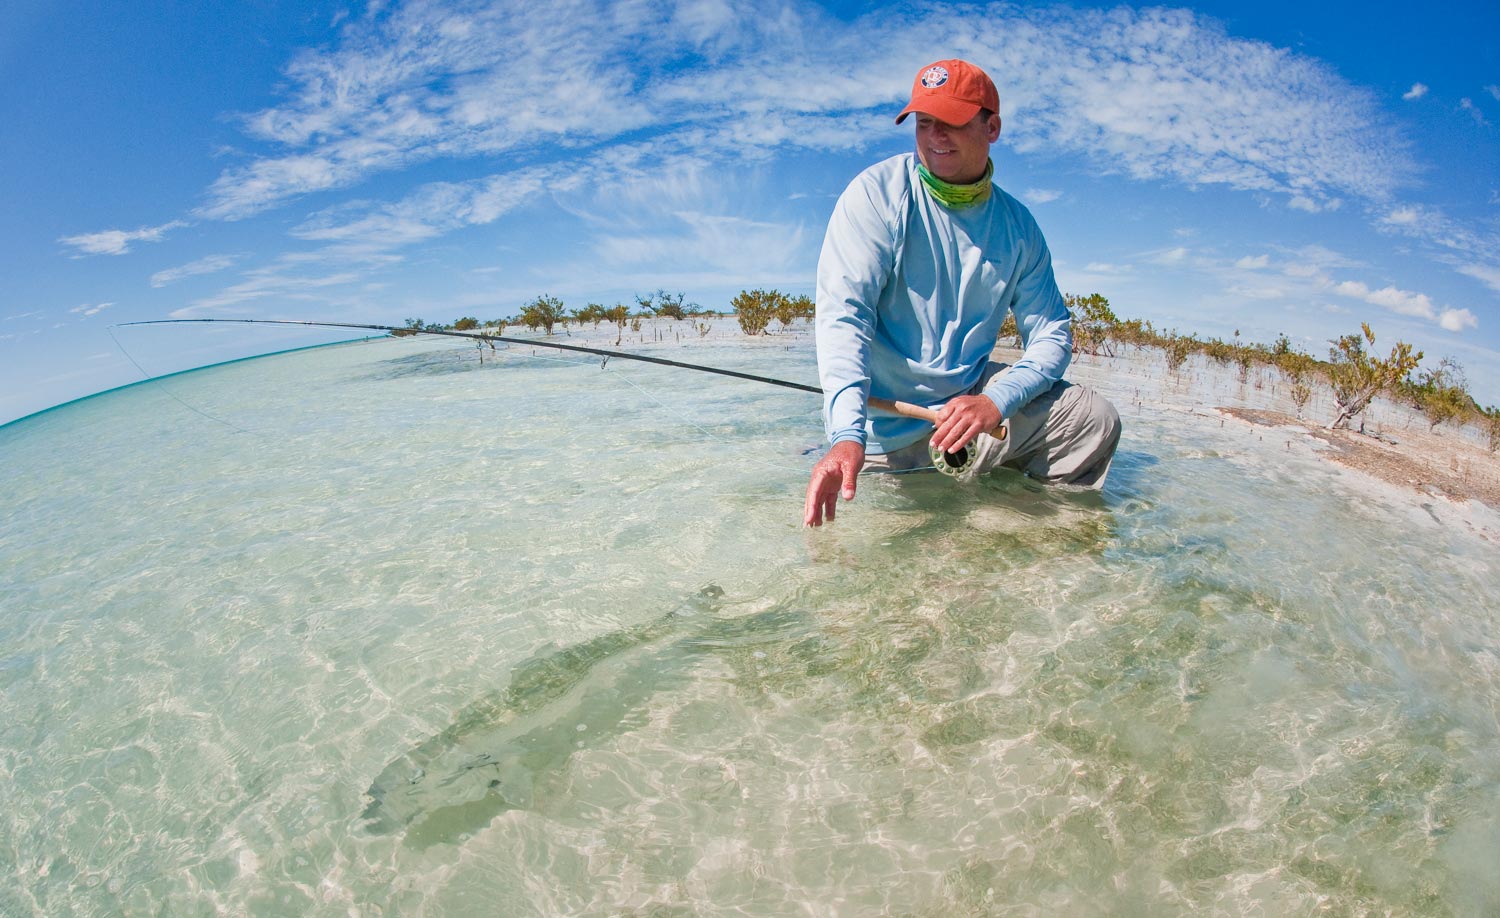 bahamas bonefish flies - Fly Fishing, Gink and Gasoline, How to Fly Fish, Trout Fishing, Fly Tying